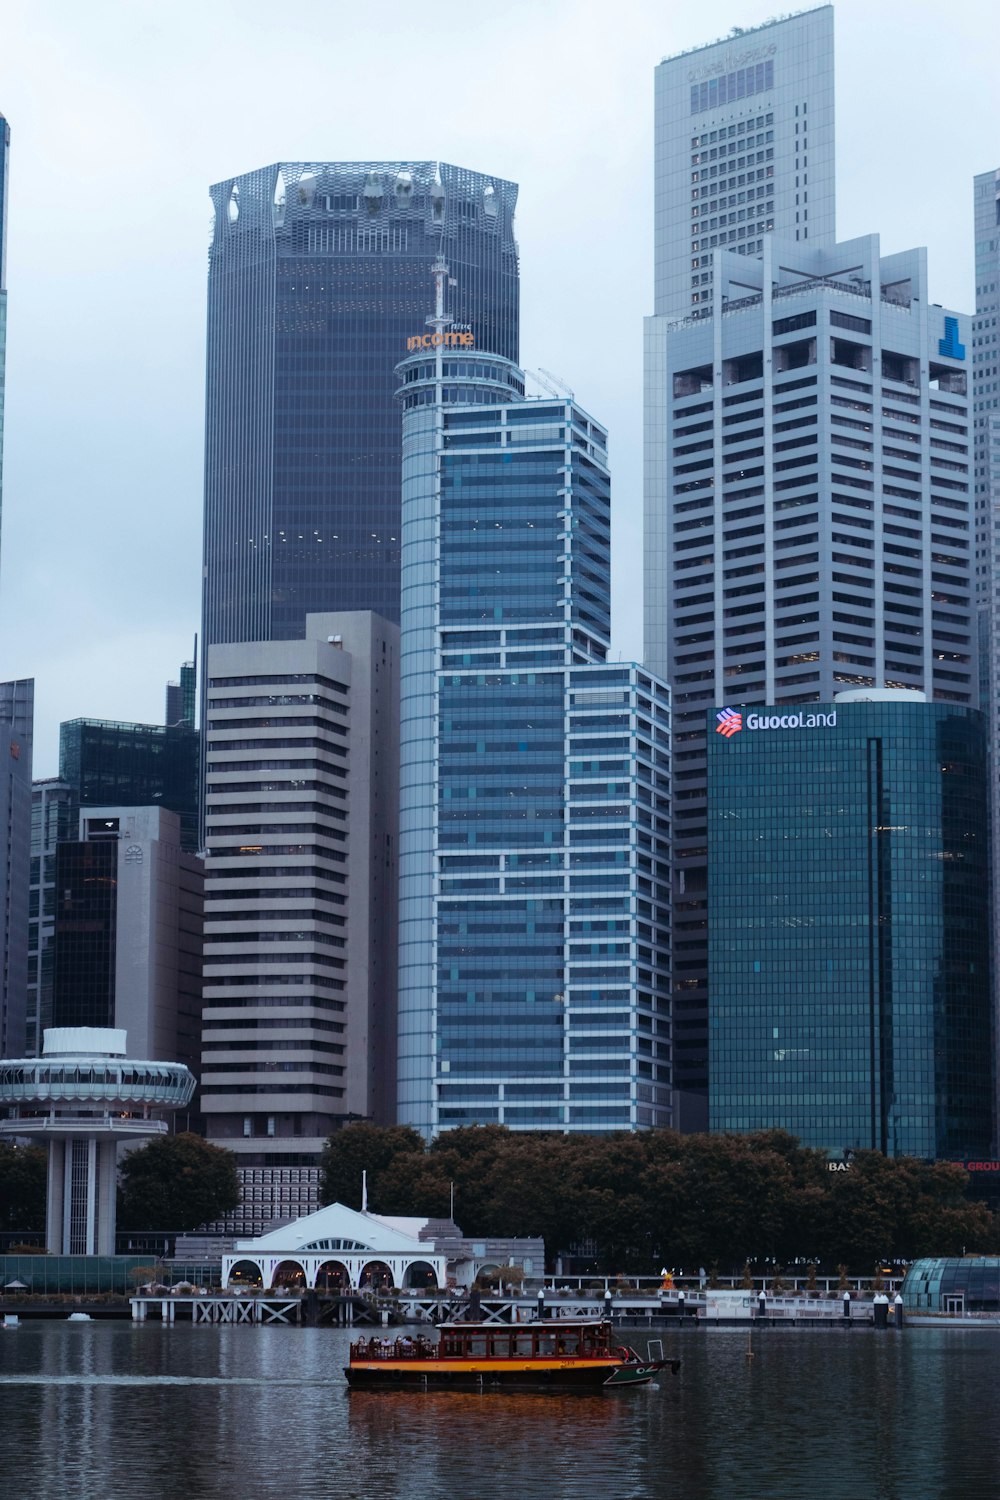 a boat floating in the water in front of tall buildings